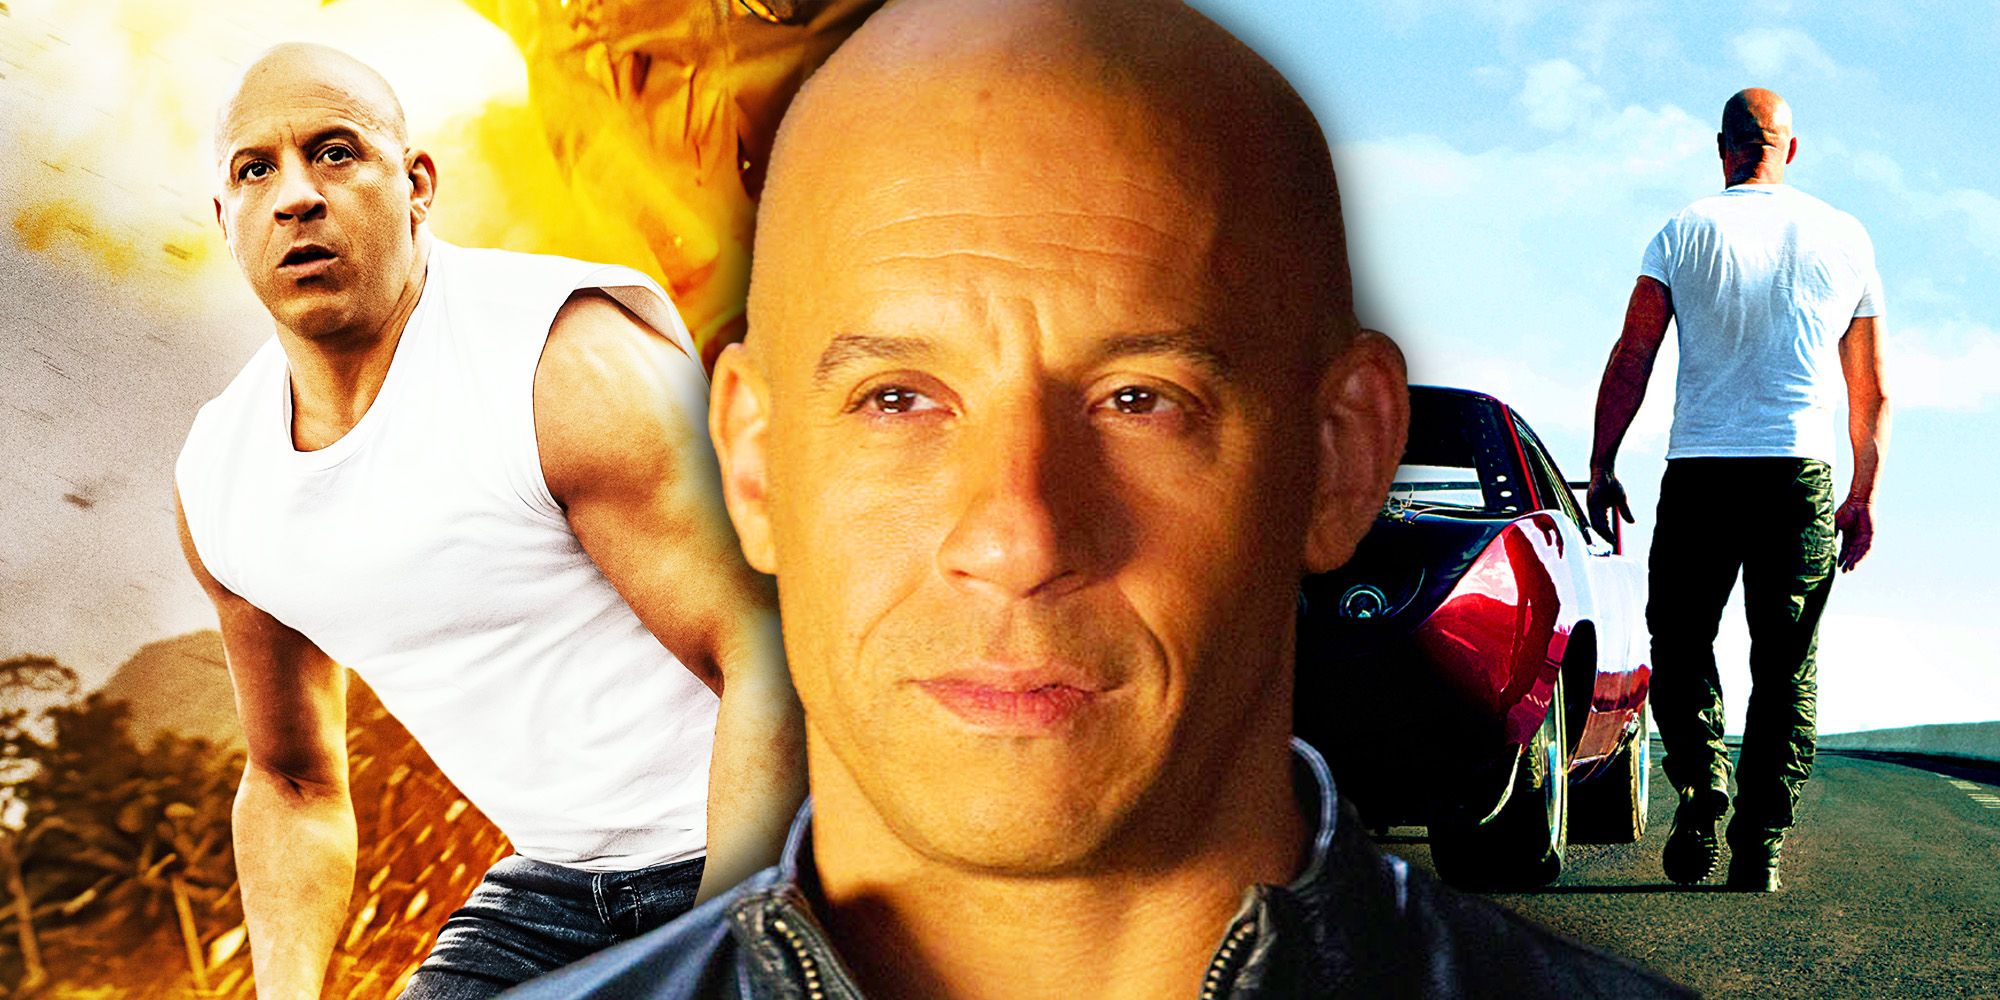 Custom image of Vin Diesel as Dominic Toretto in Fast and Furious